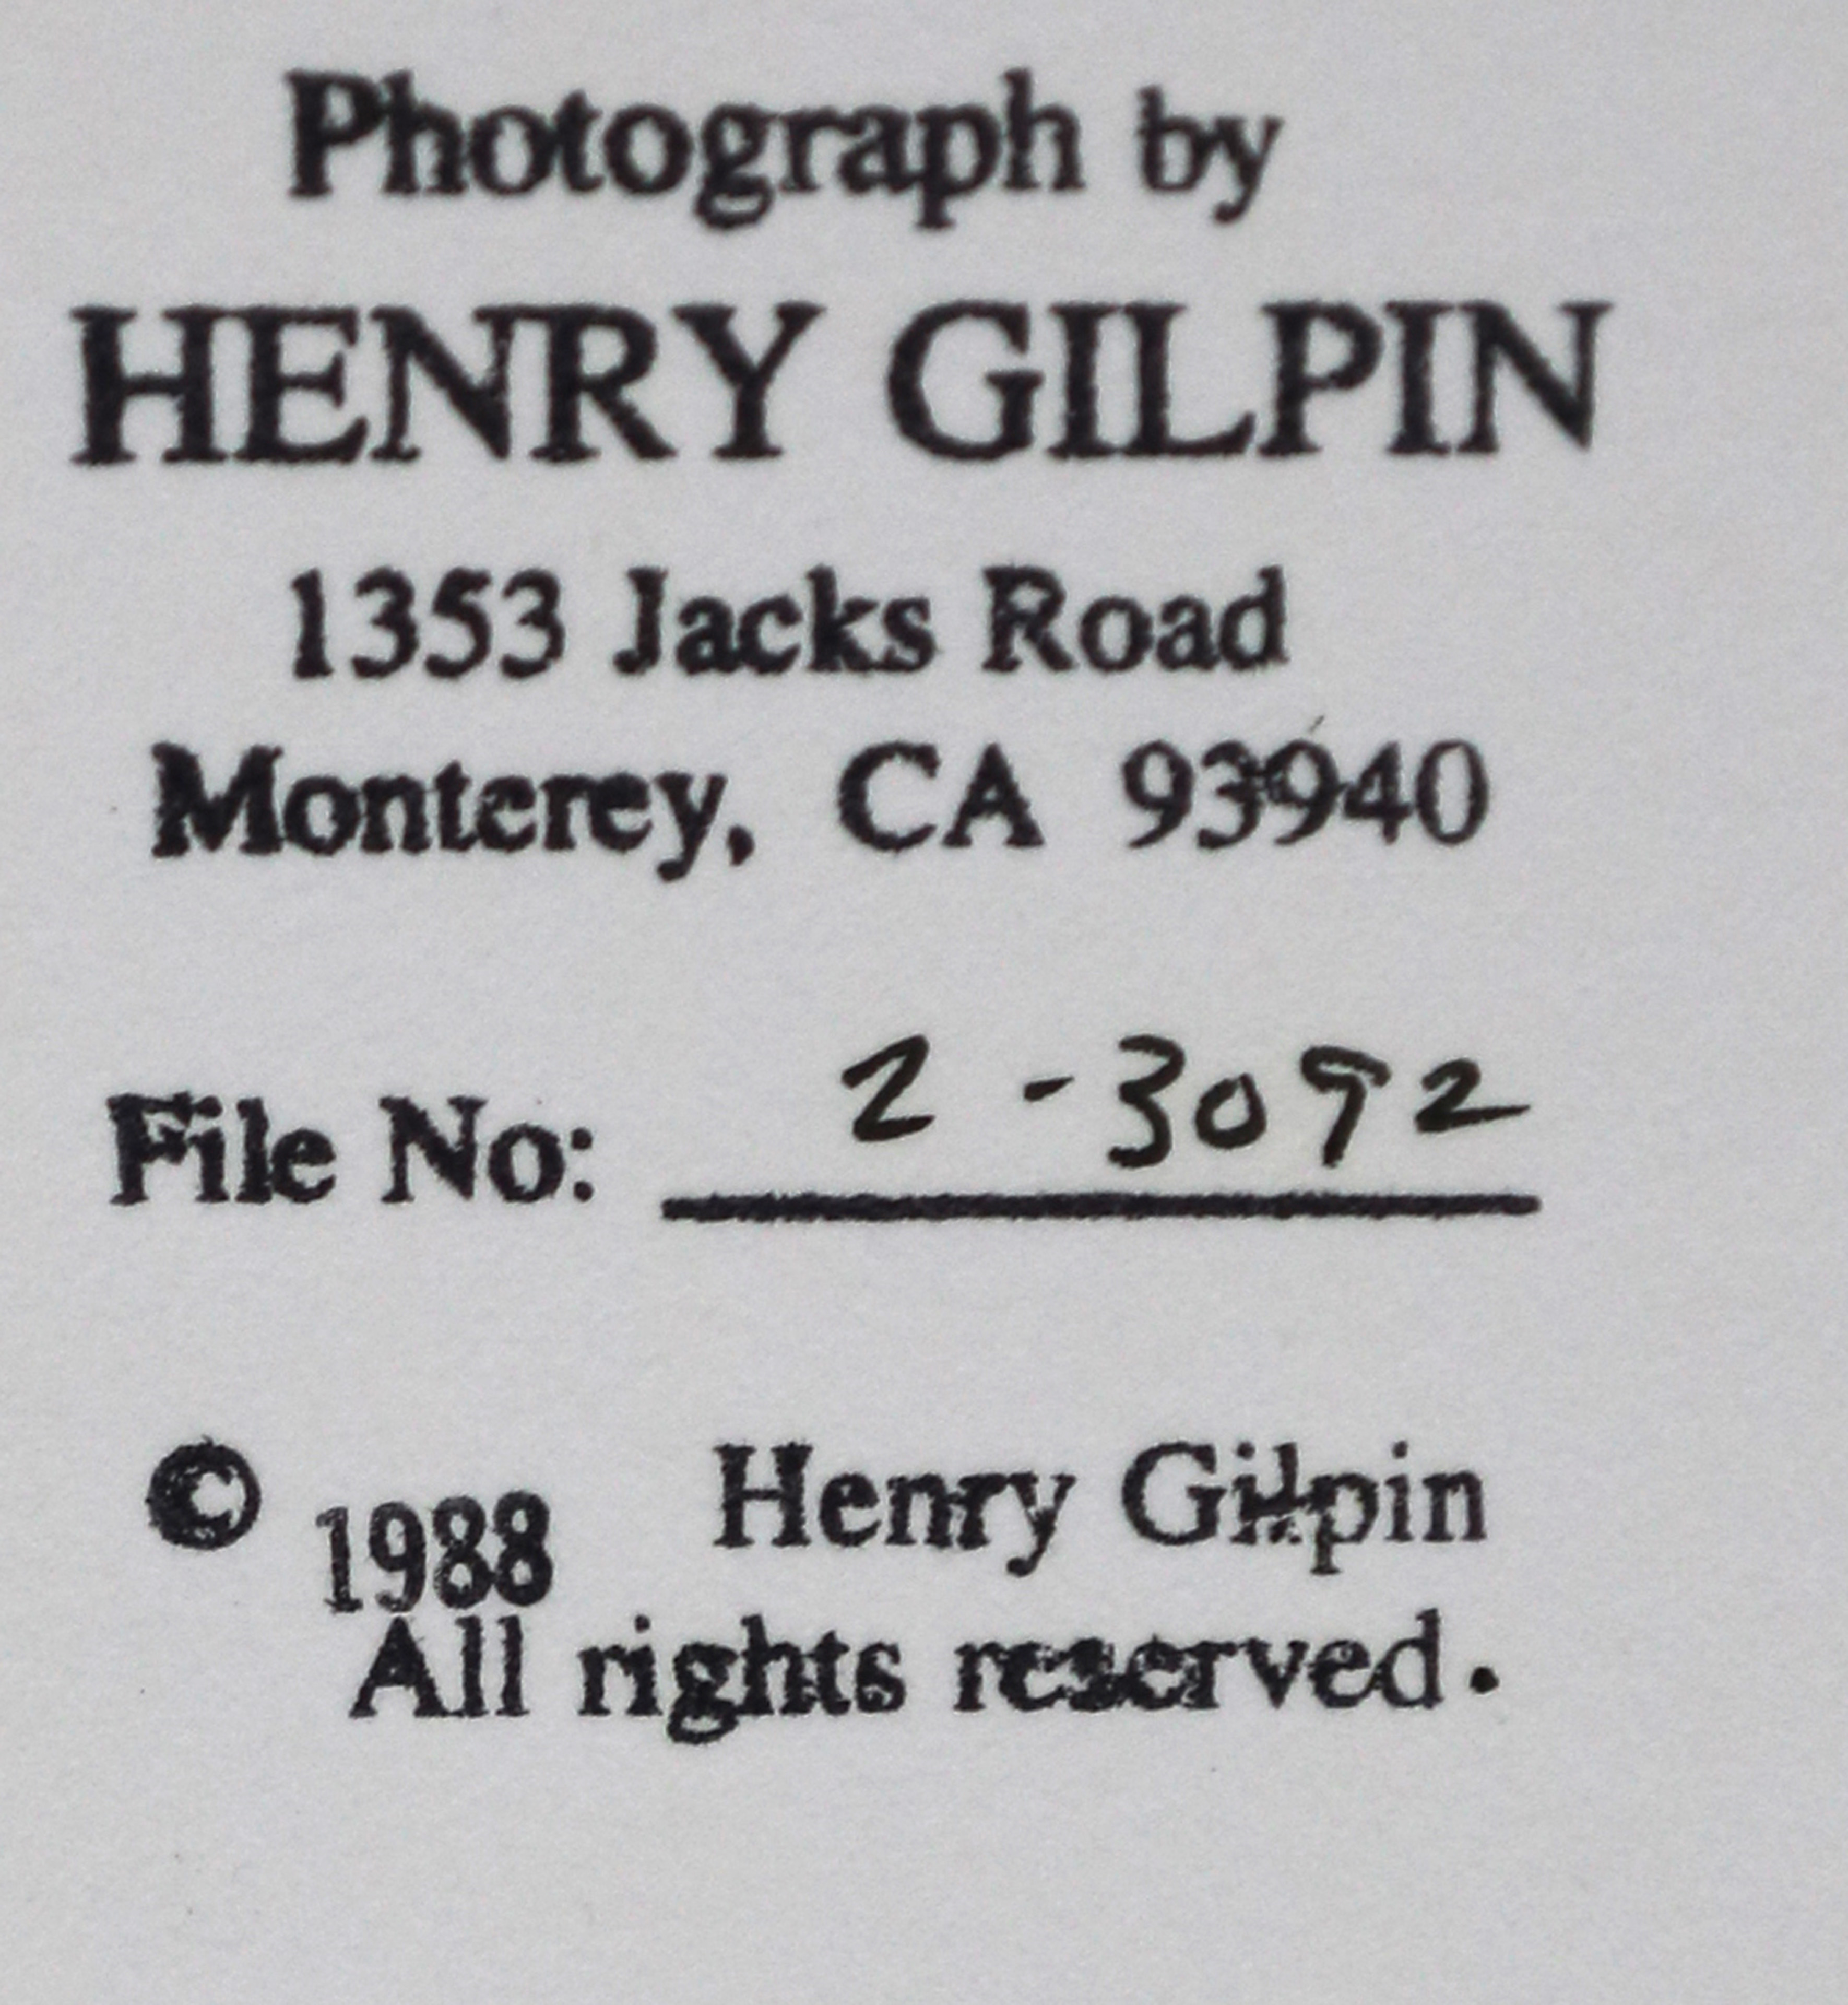 Photograph, Henry Gilpin - Image 4 of 5